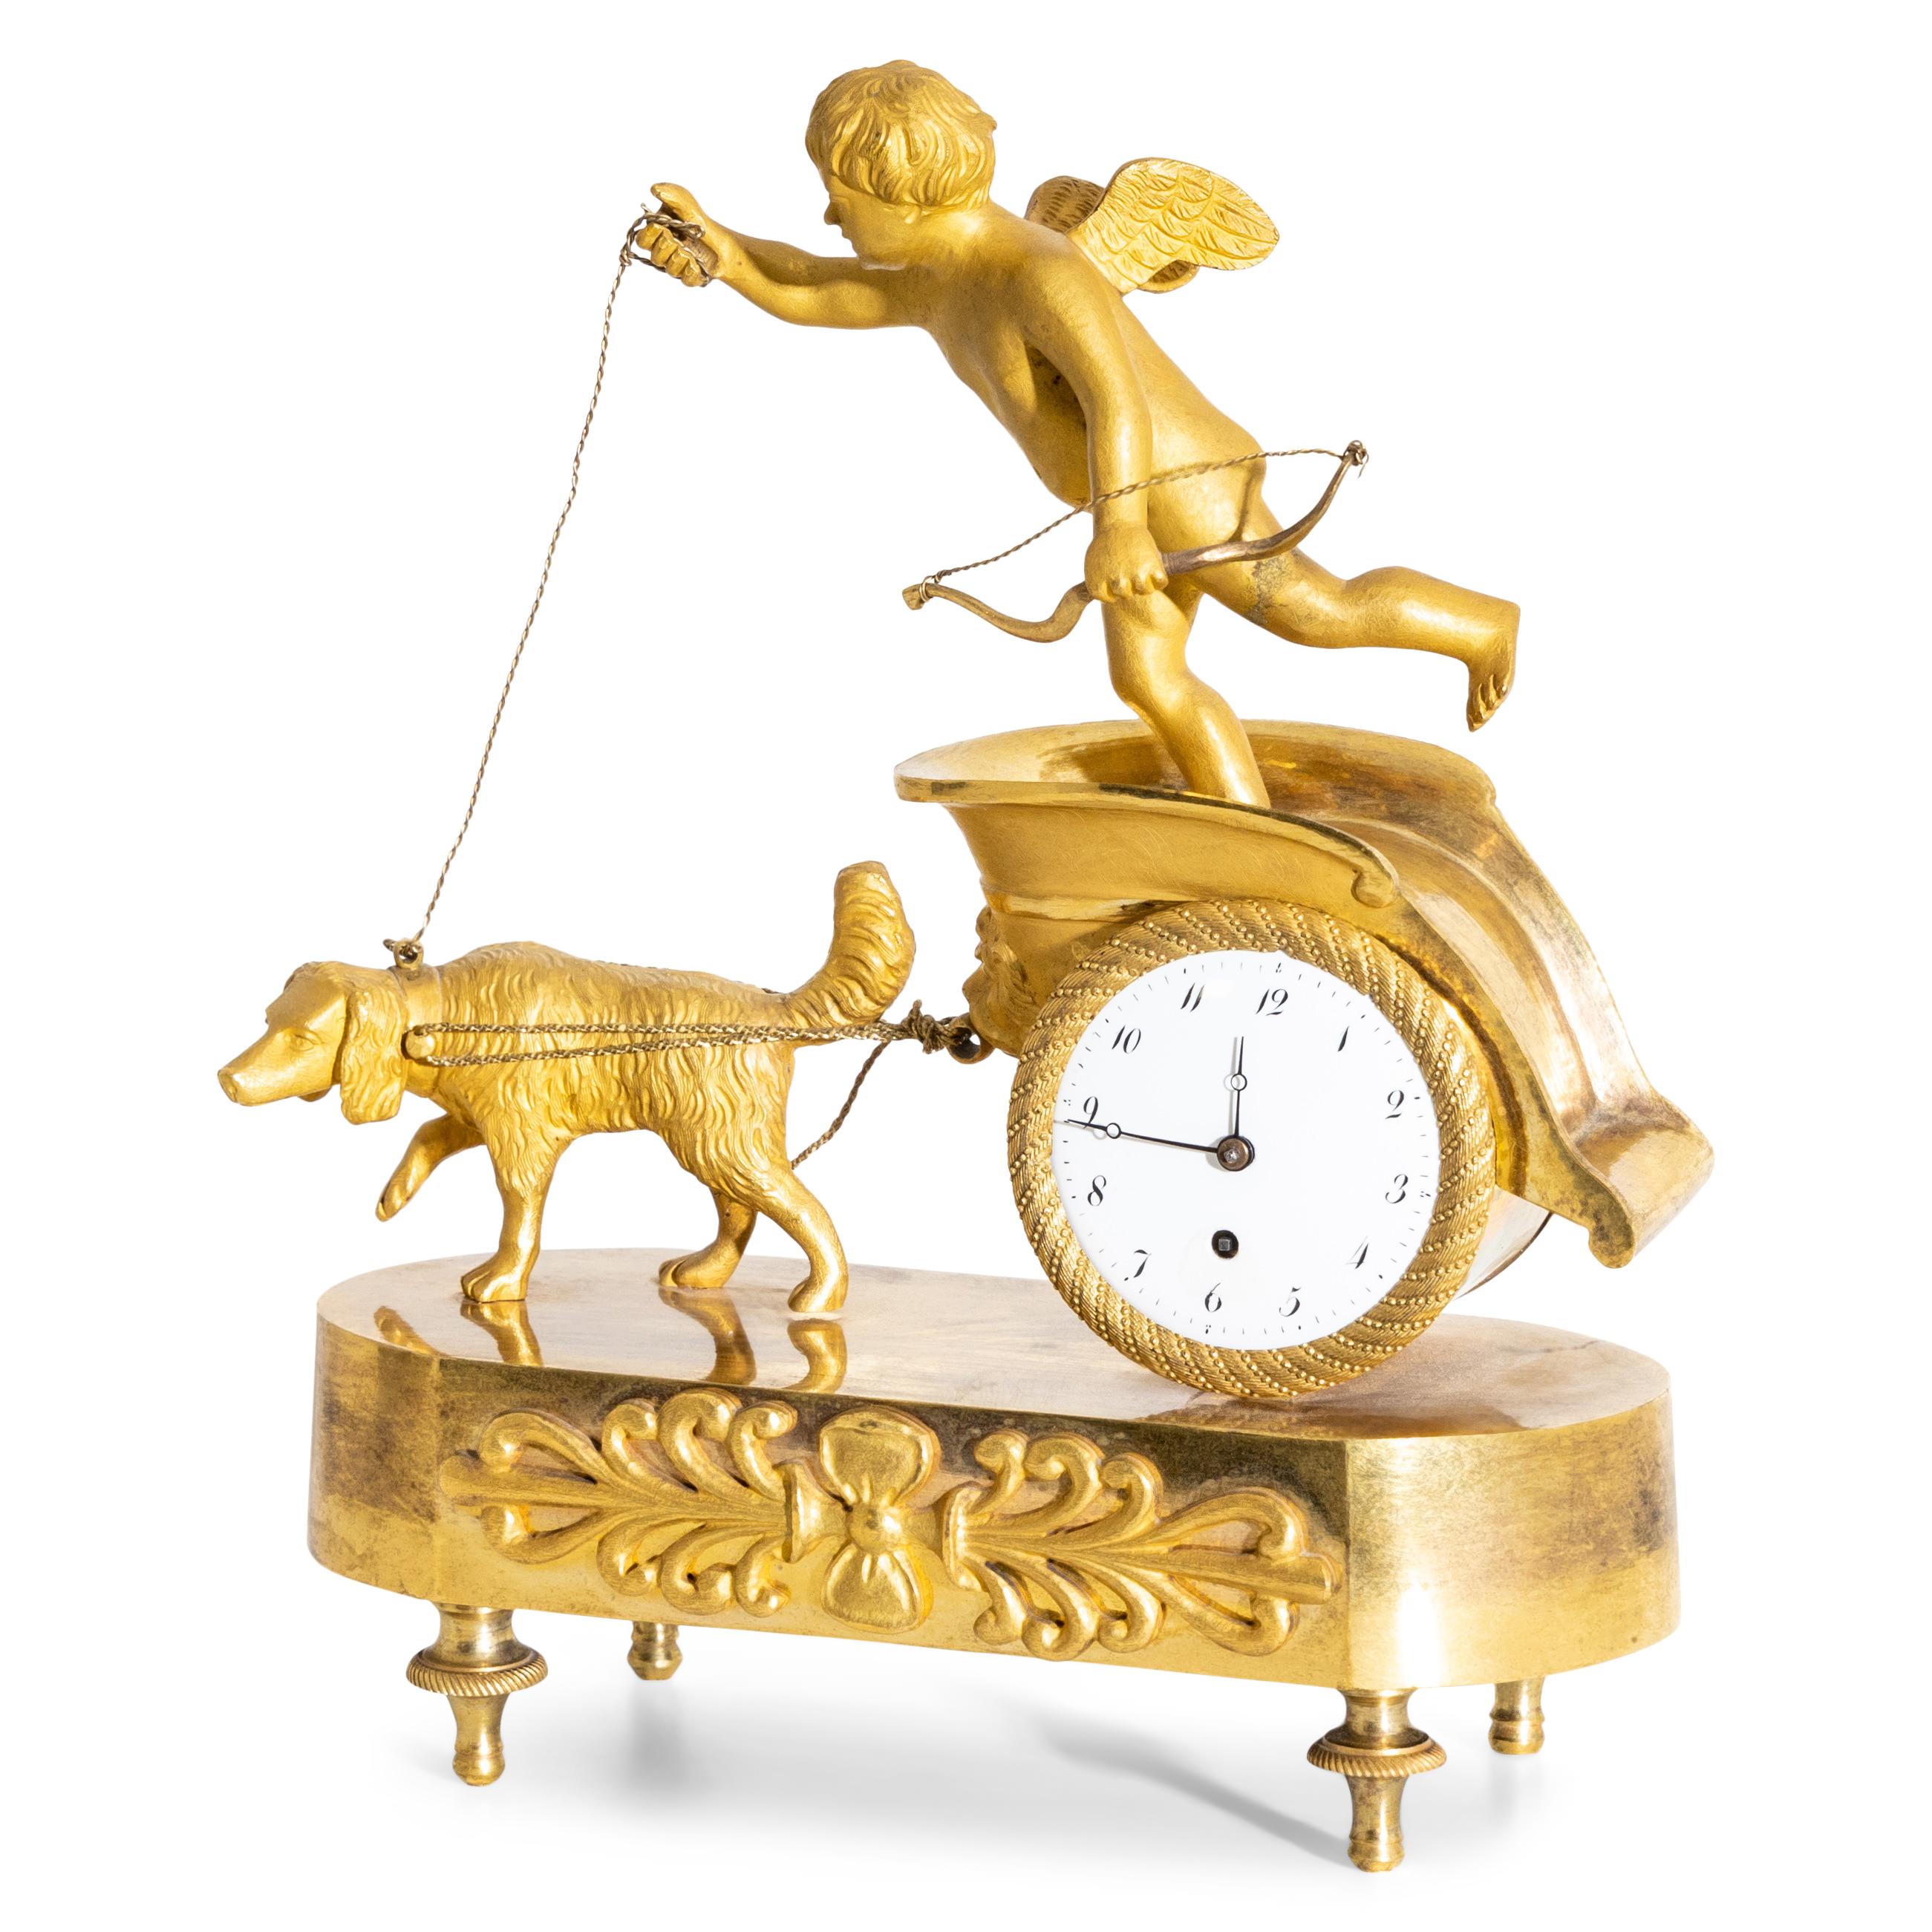 Small fire-gilded bronze pendule with cupid on a chariot drawn by a single dog. Enamel clockface with Arabic numerals. Movement signed Paillard à Paris, No. 545.